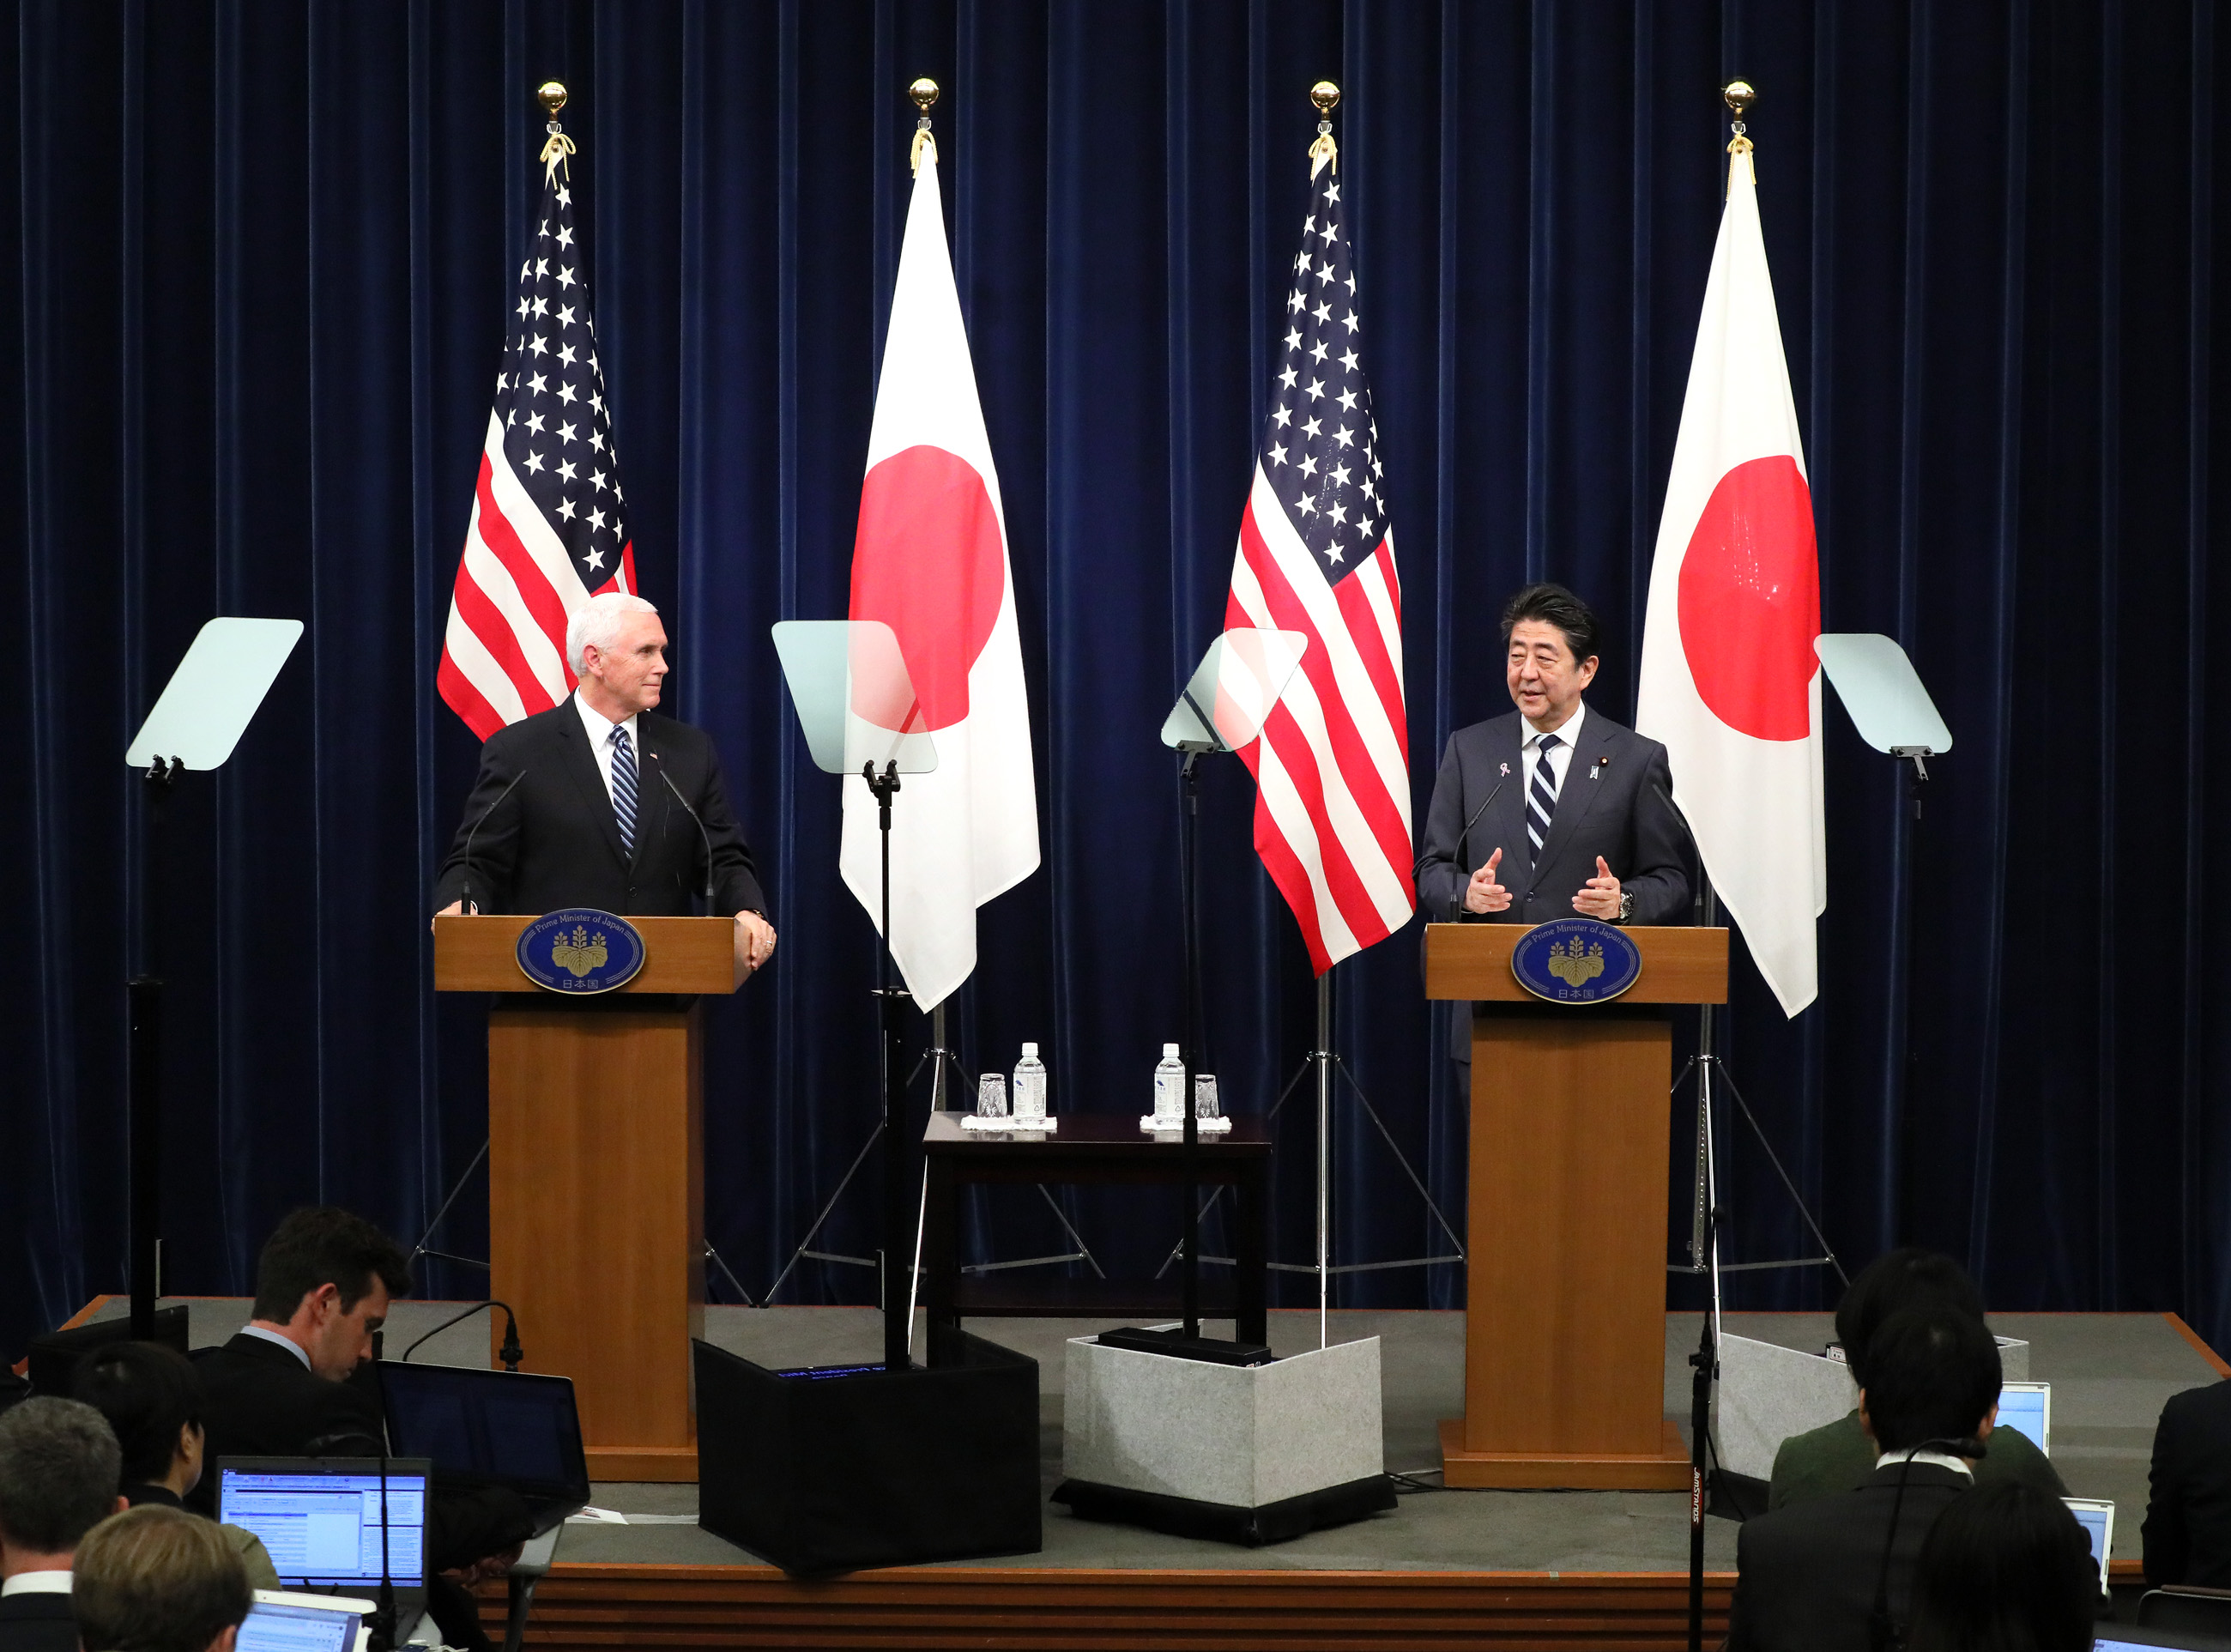 Photograph of the joint press announcement